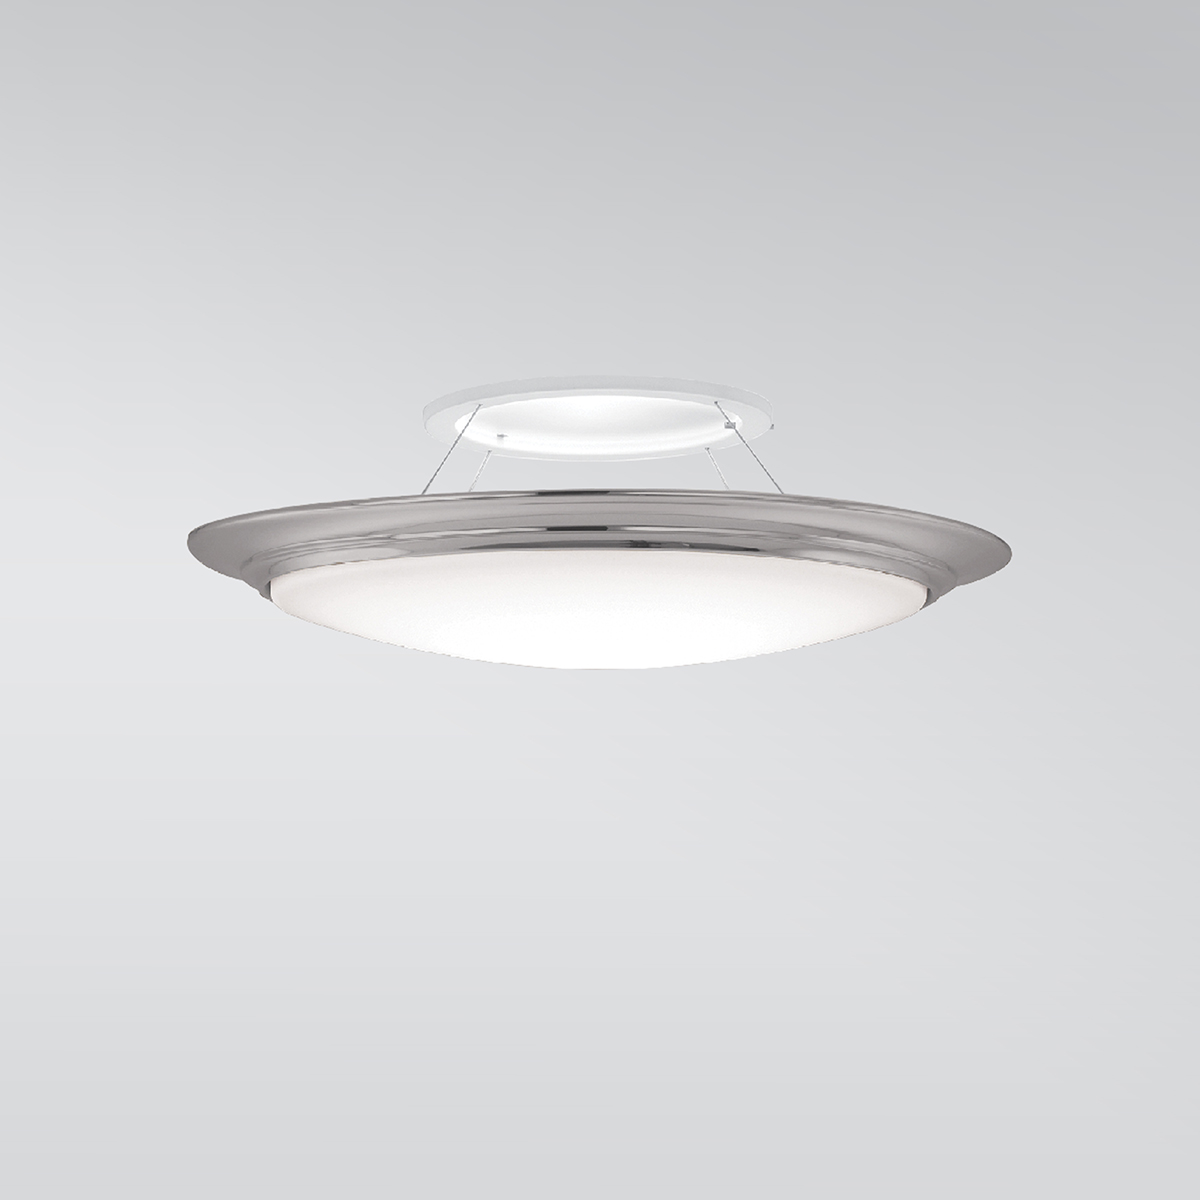 Ovation CM1708 Ceiling mount light fixture with the illusion of a pendant